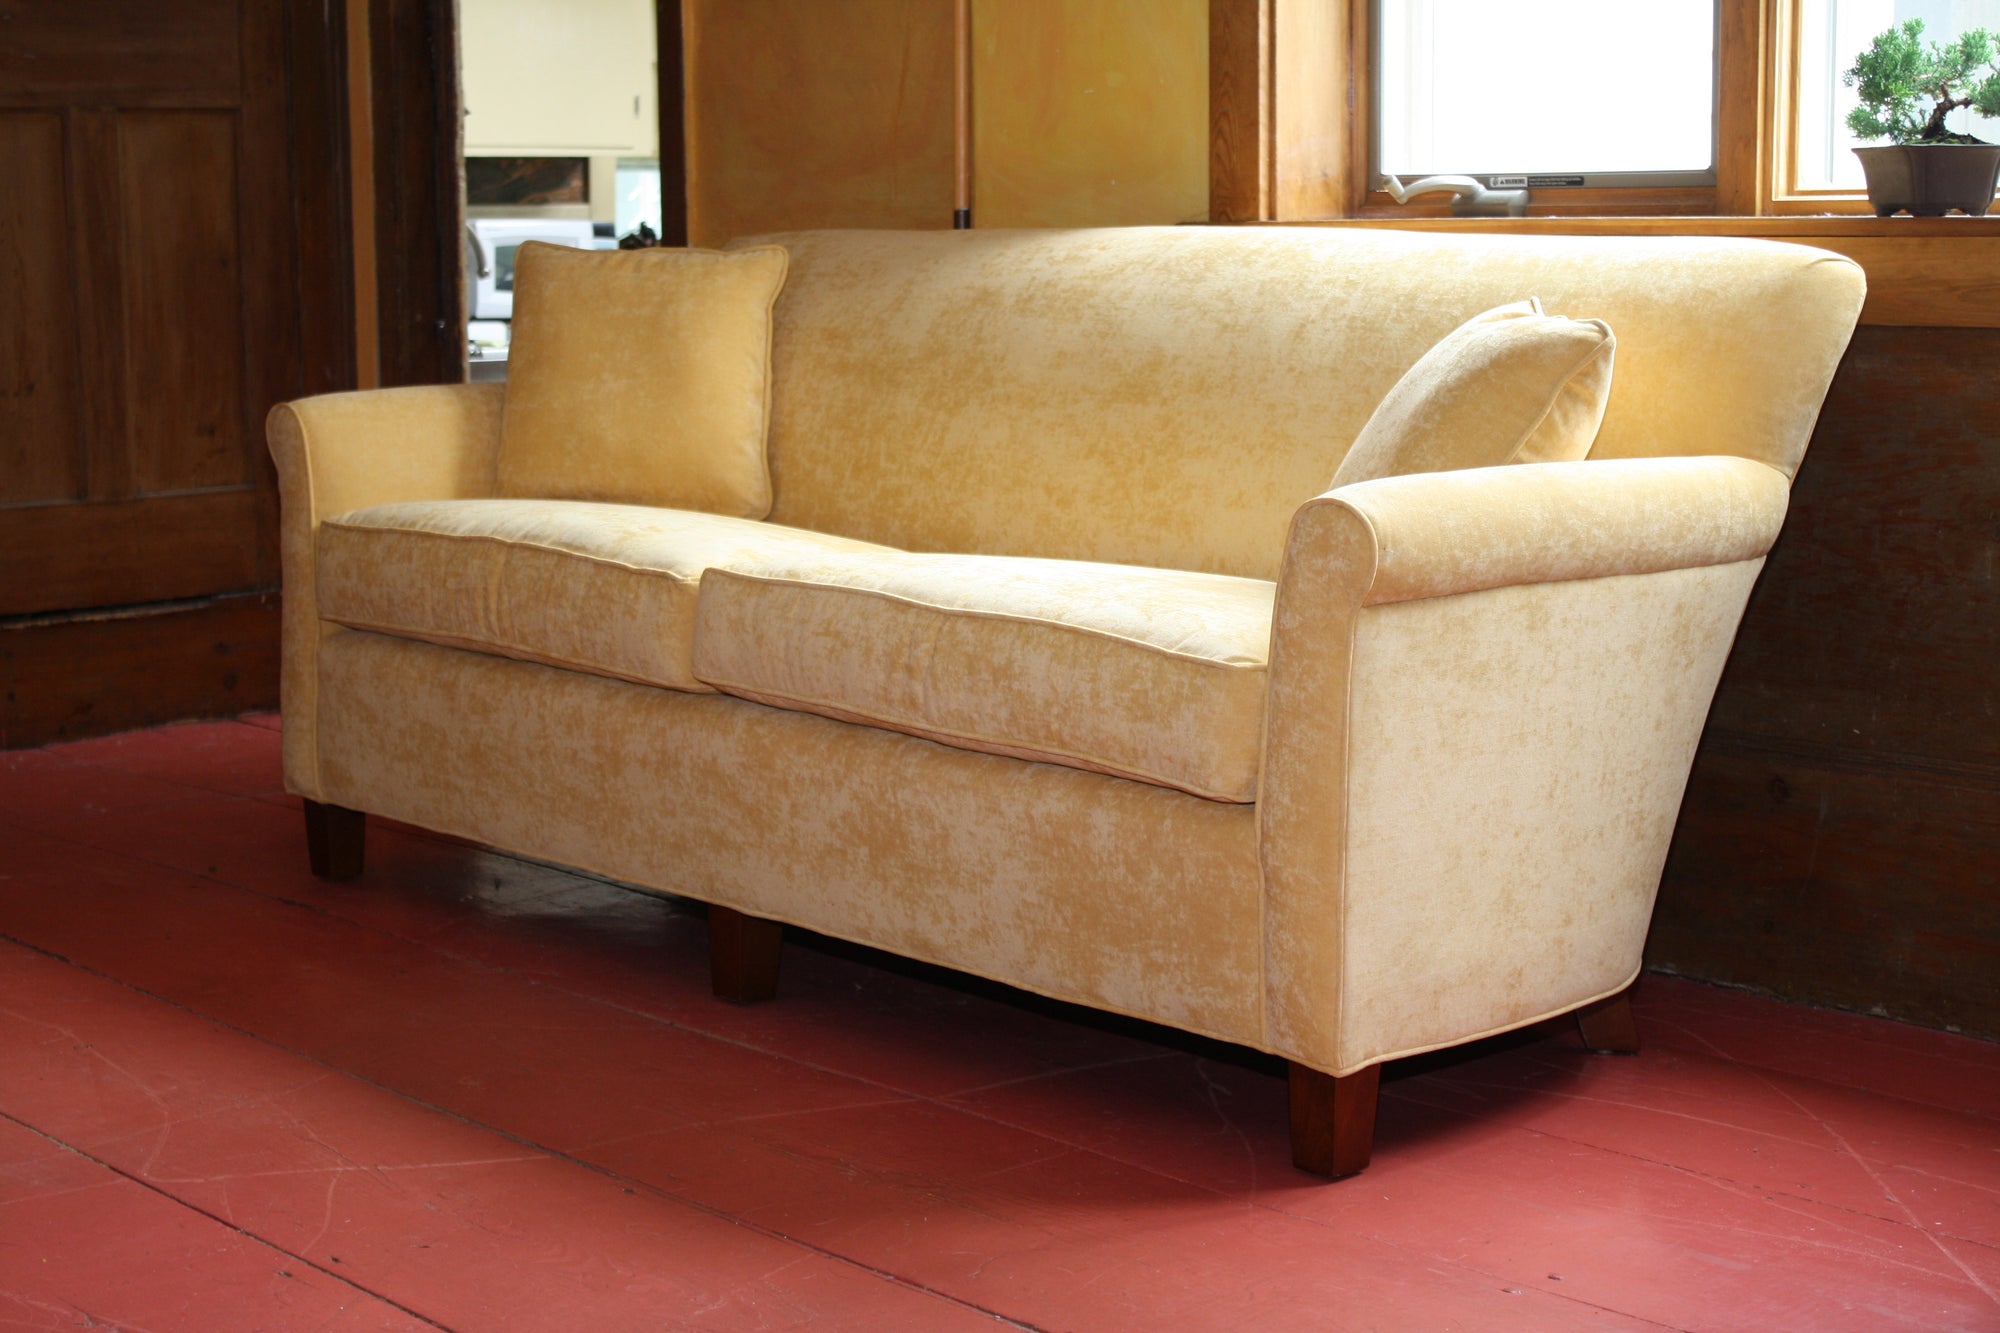 A small yellow sofa with a luxurious buttery colored fabric